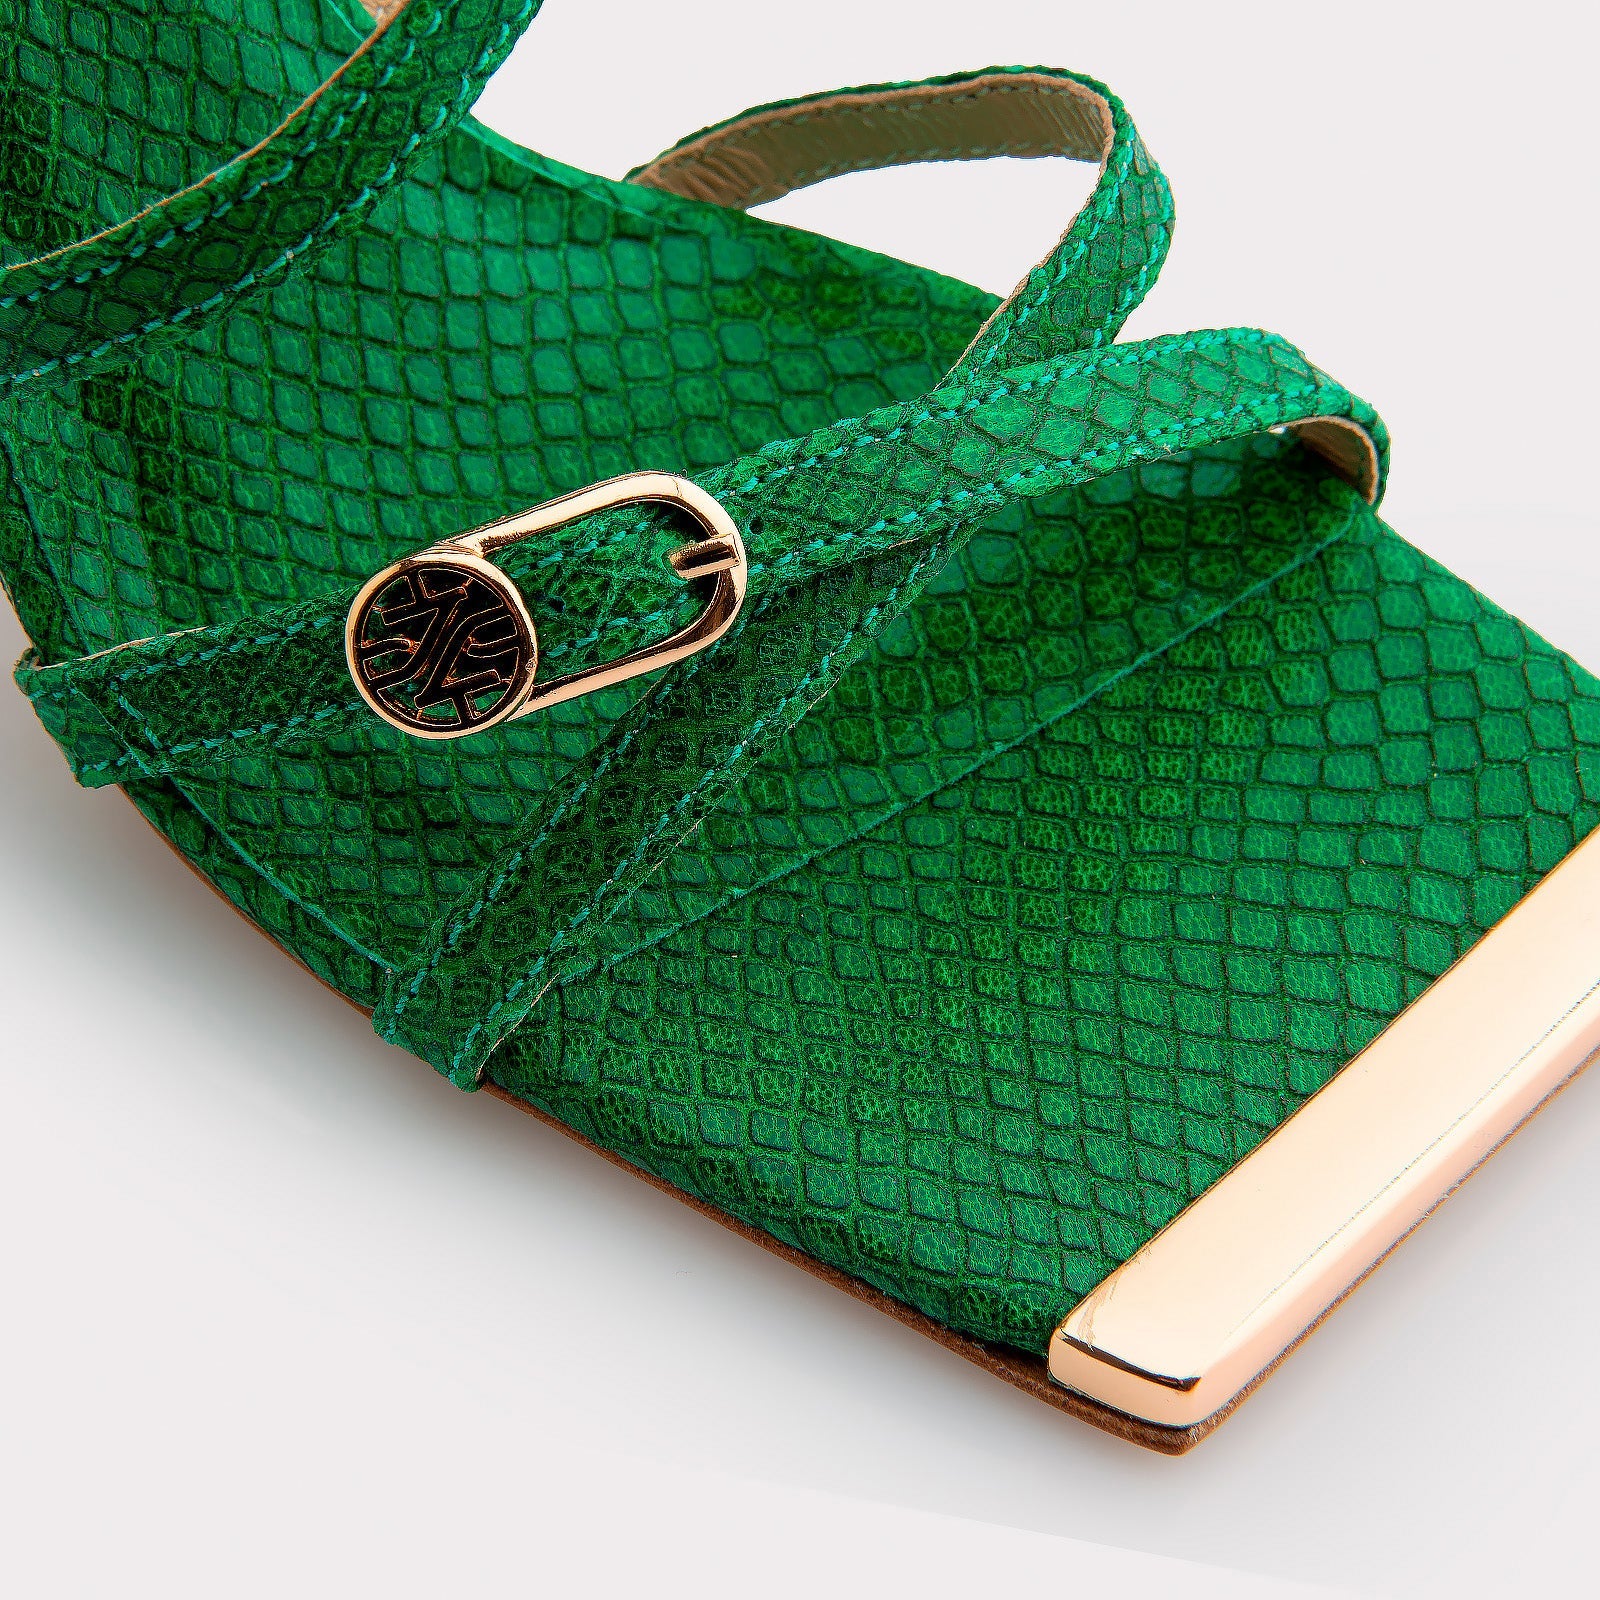 TEXTURED LEATHER SANDALS IVA GREEN